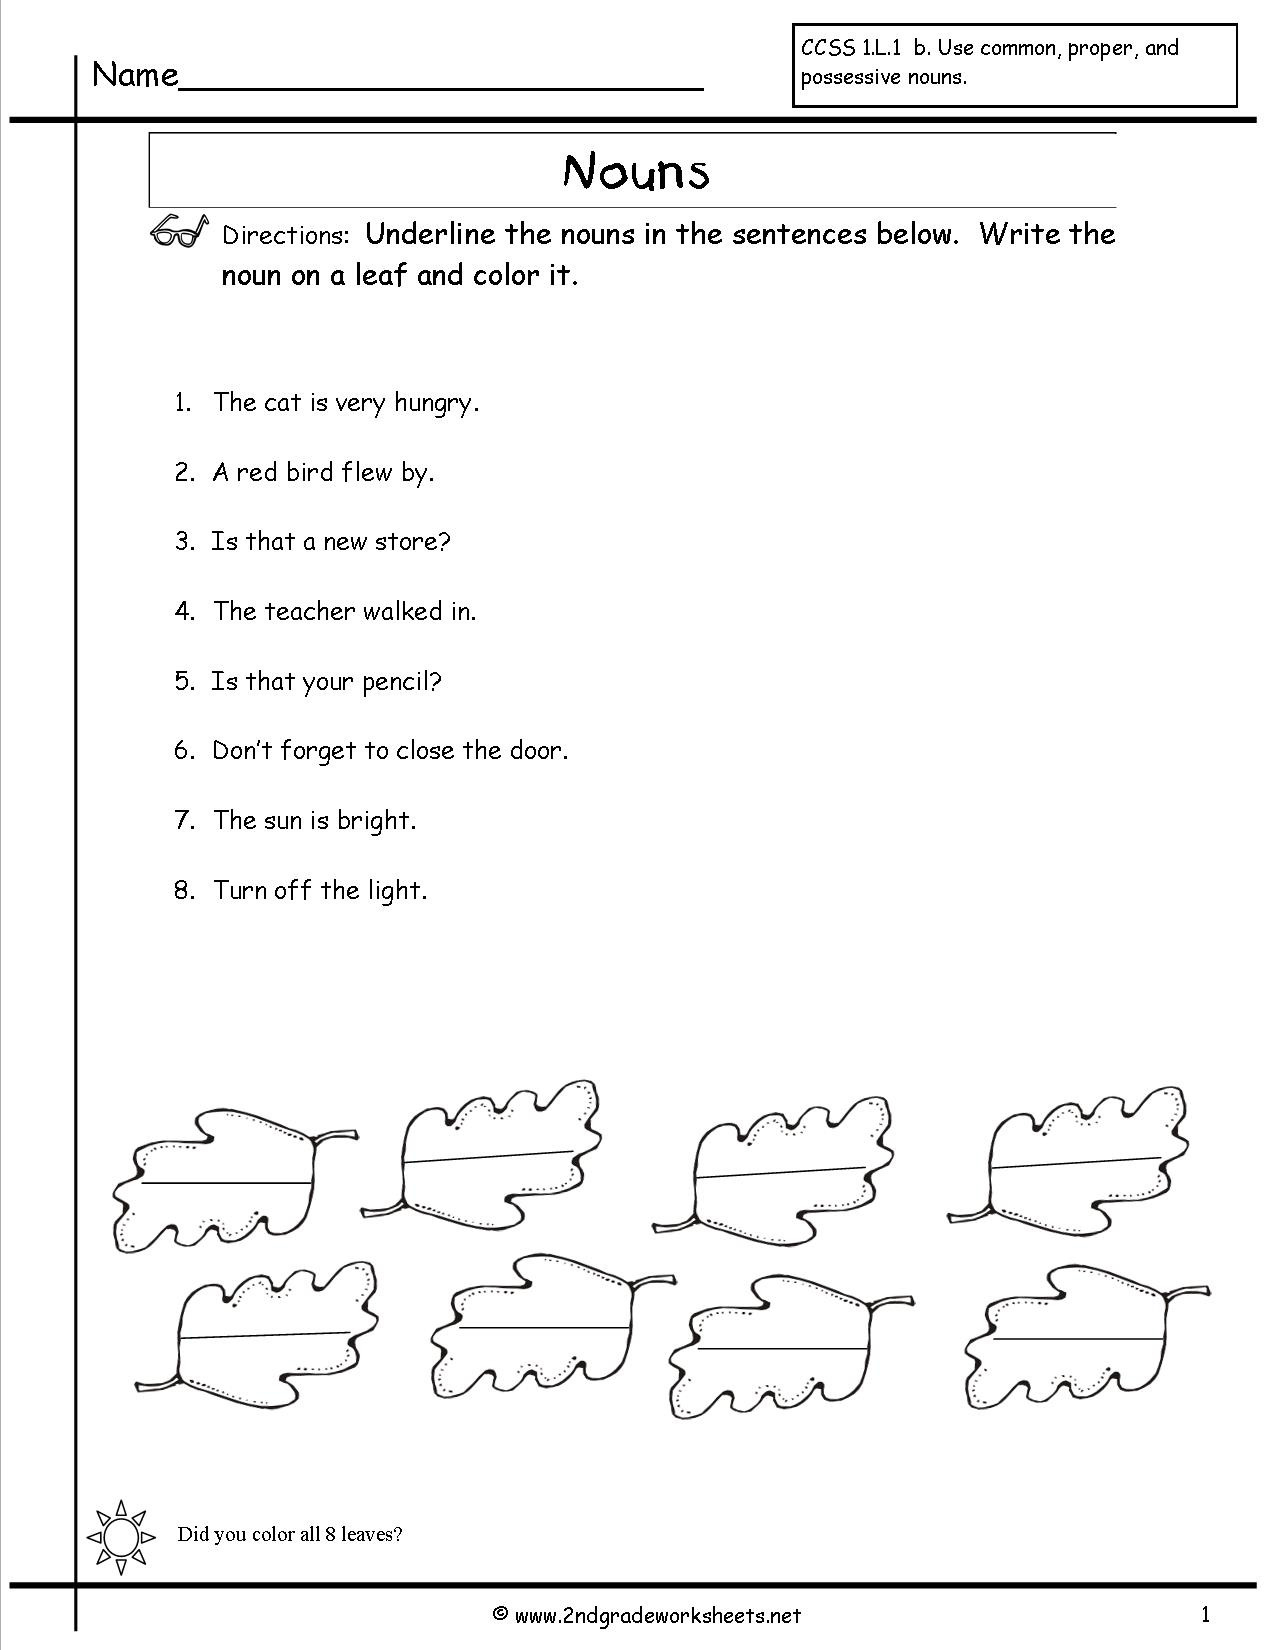 free-printable-noun-worksheets-for-5th-grade-learning-how-to-read